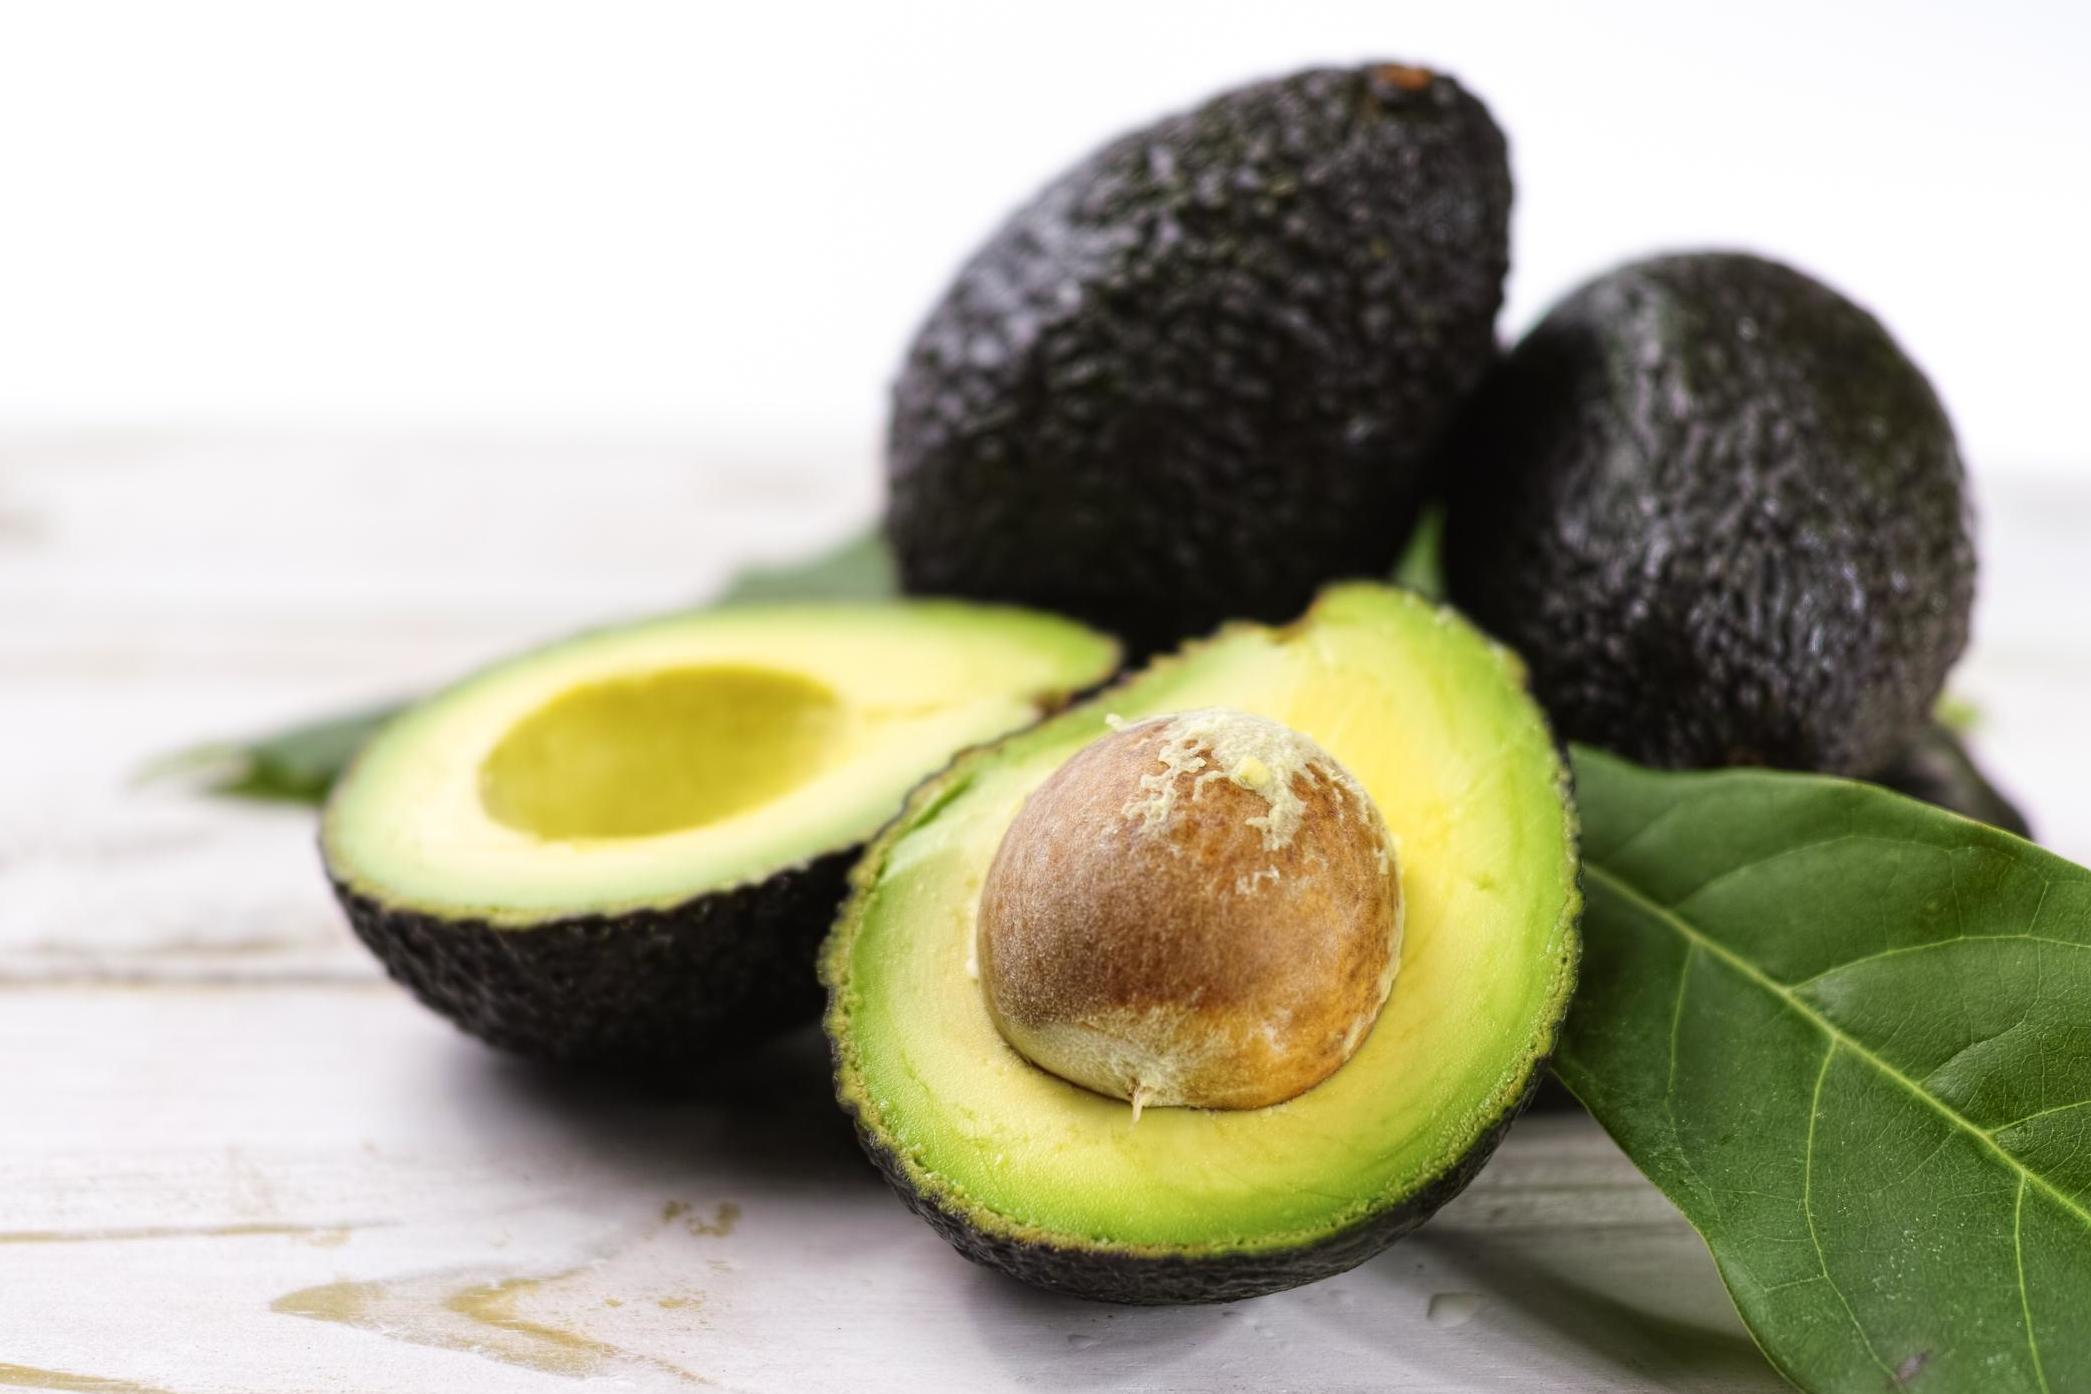 Avocados are high in monosaturated fat